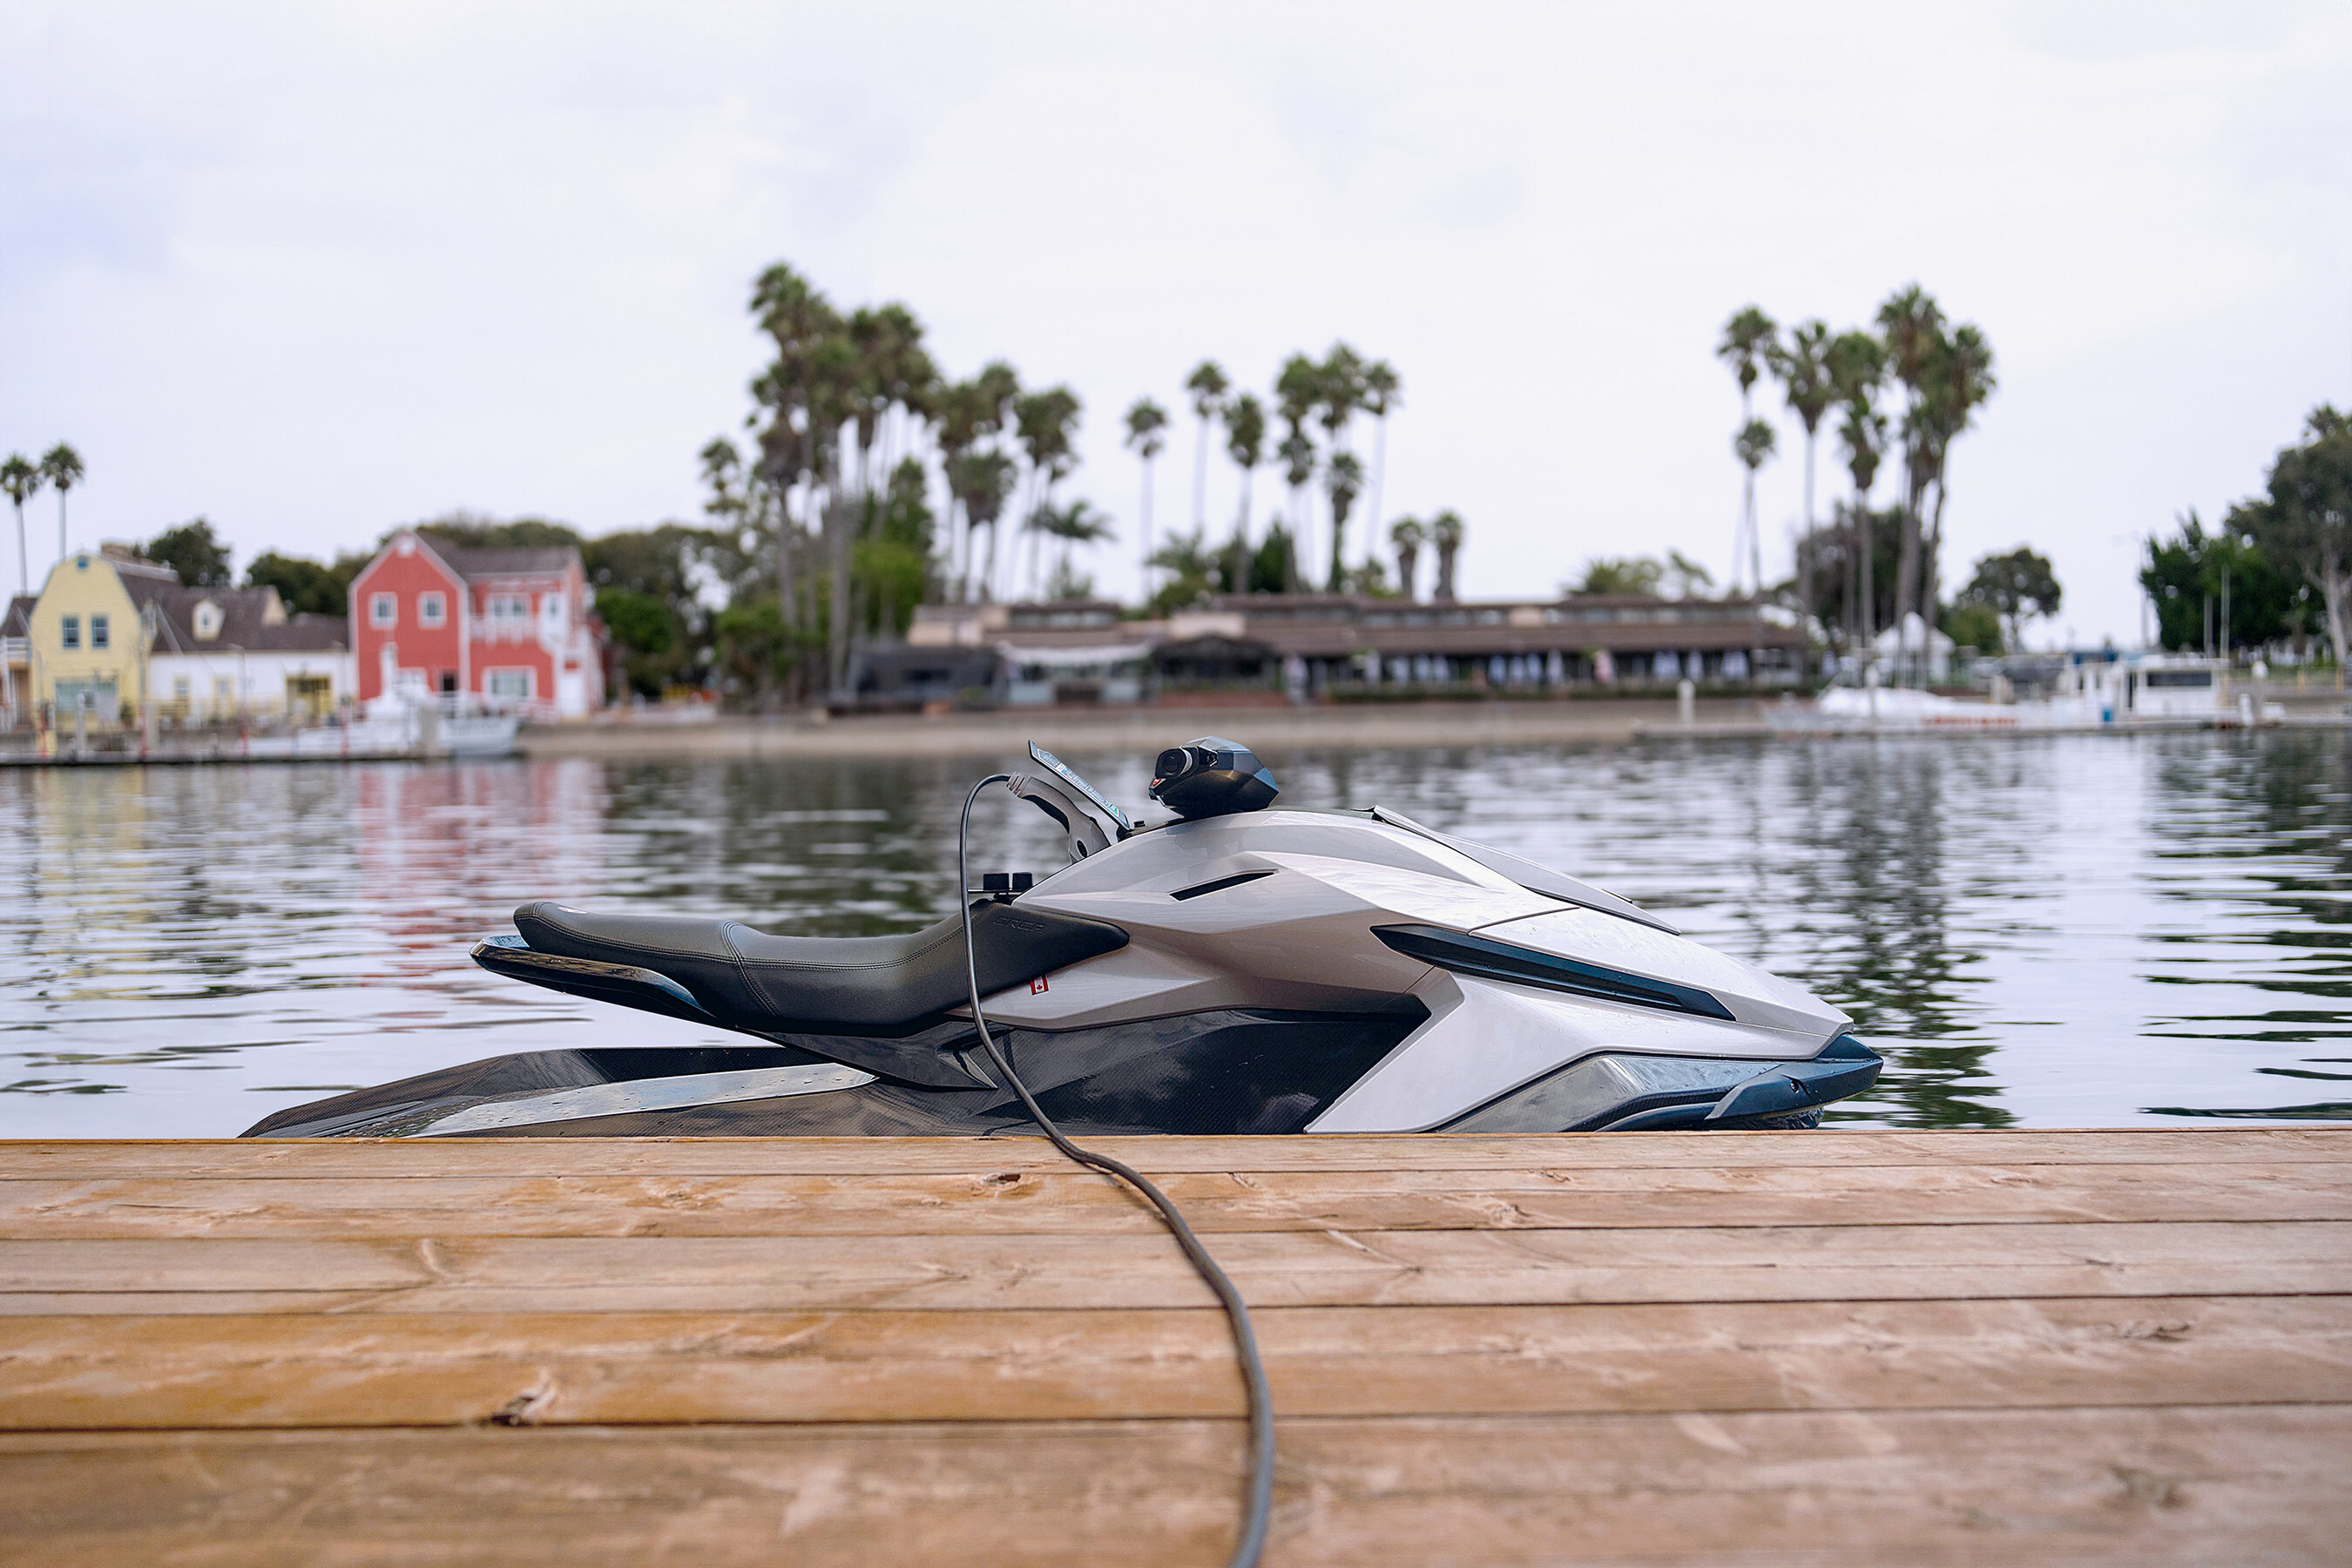 Taiga's 100% electric personal watercraft charging at the dock (CNW Group/Taiga Motors Corporation)